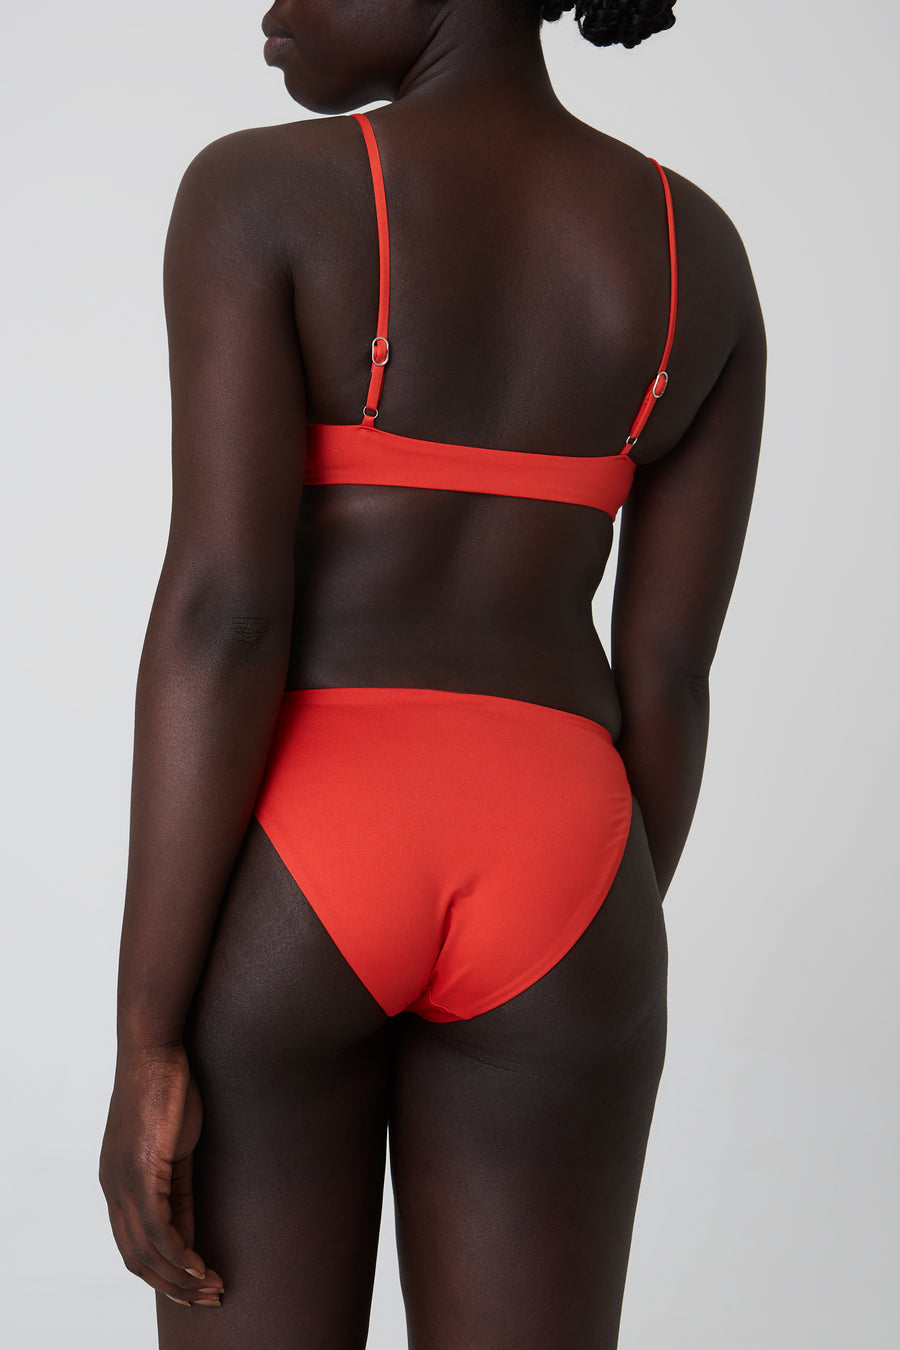 Bottom – classic, red